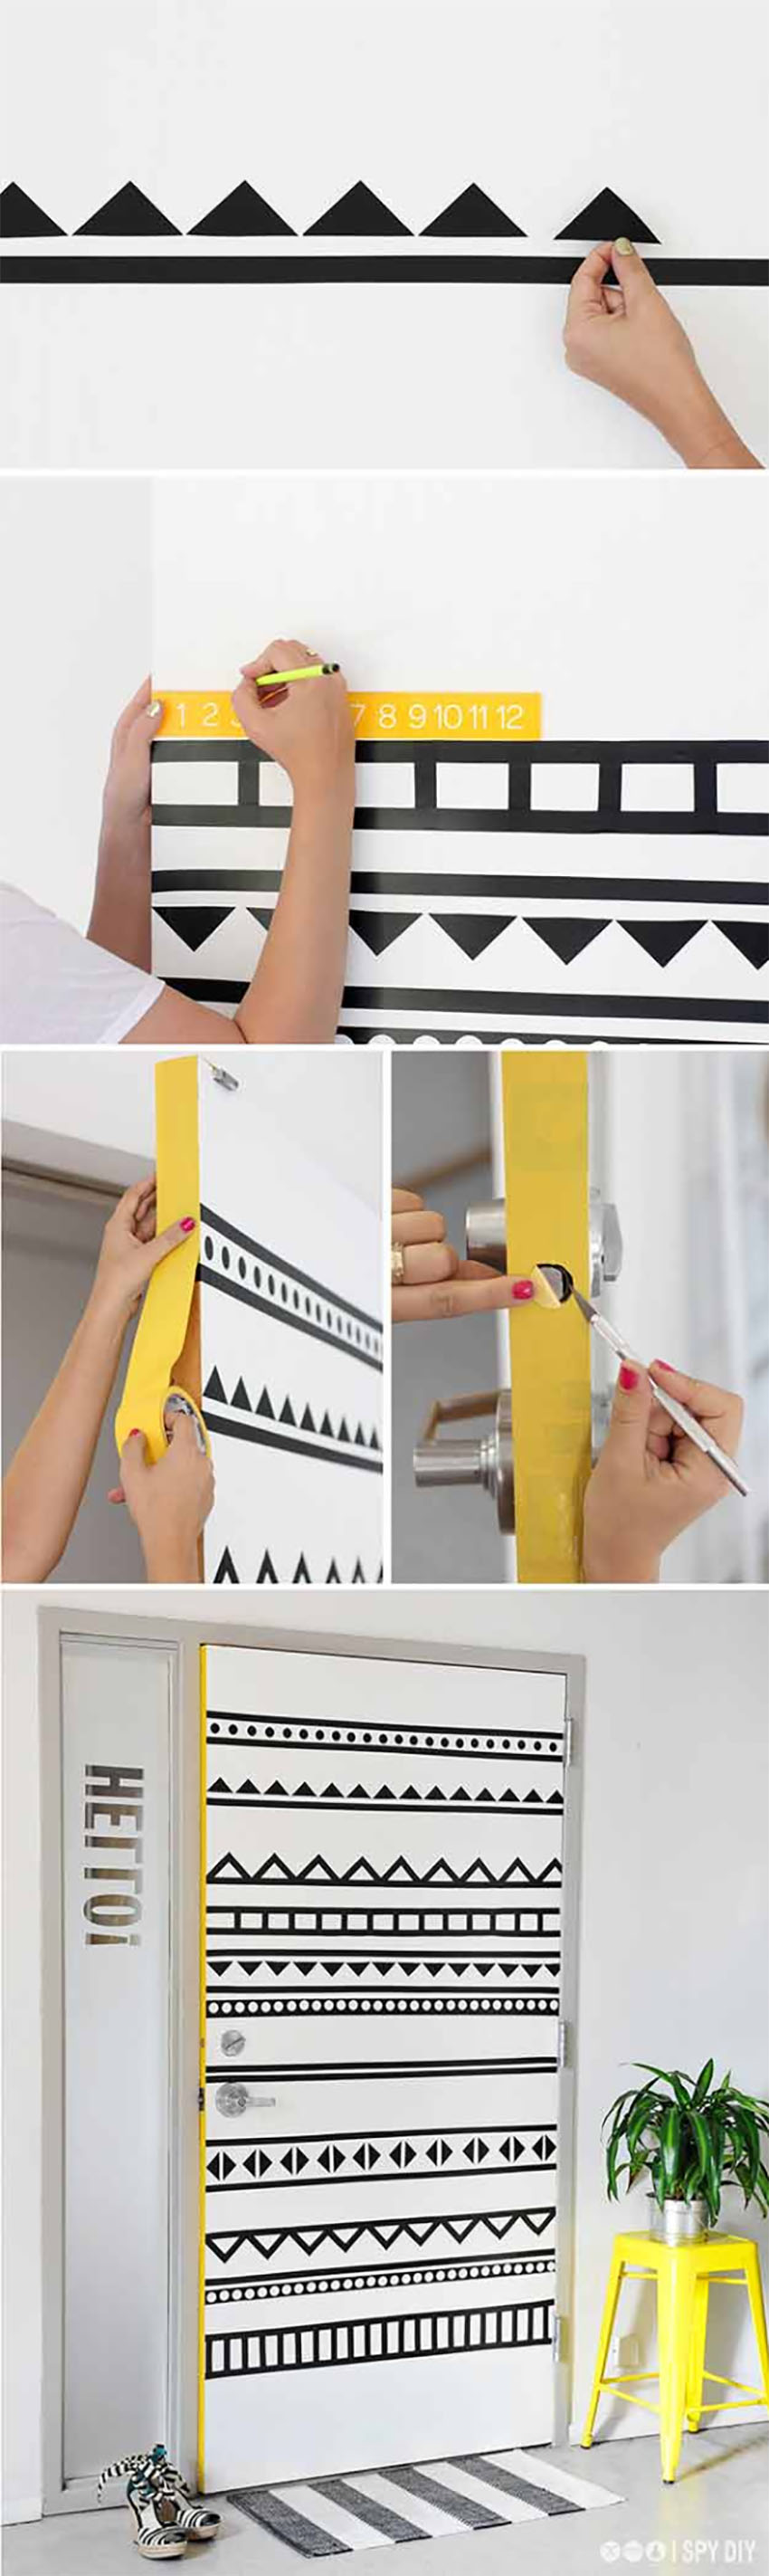 Washi Tape is an easy way to redecorate!